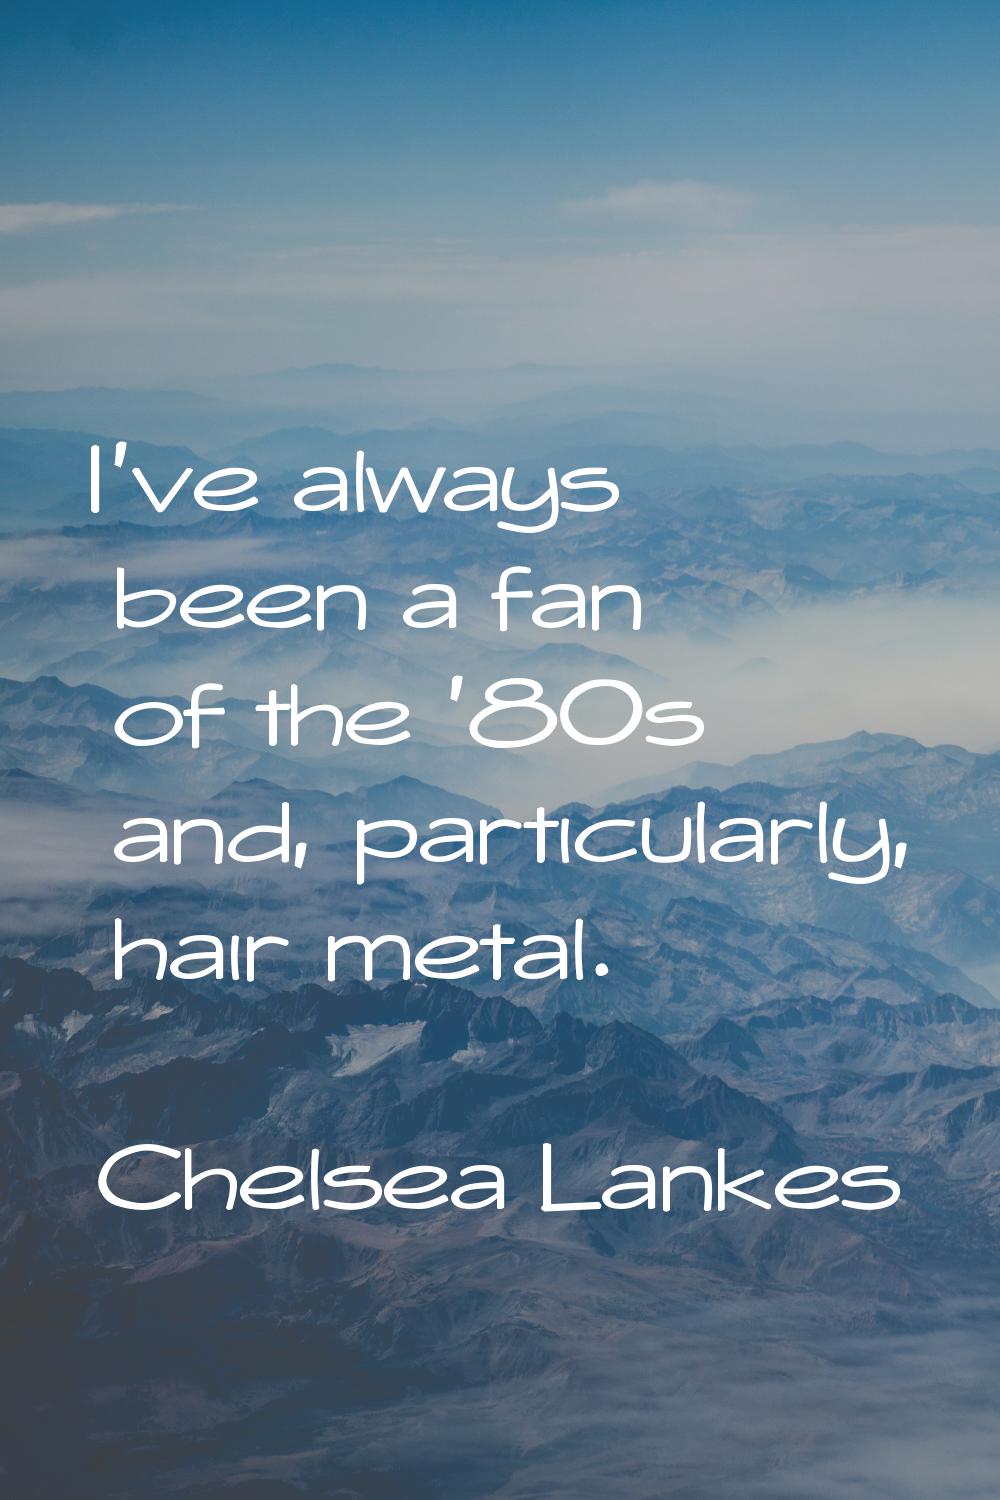 I've always been a fan of the '80s and, particularly, hair metal.